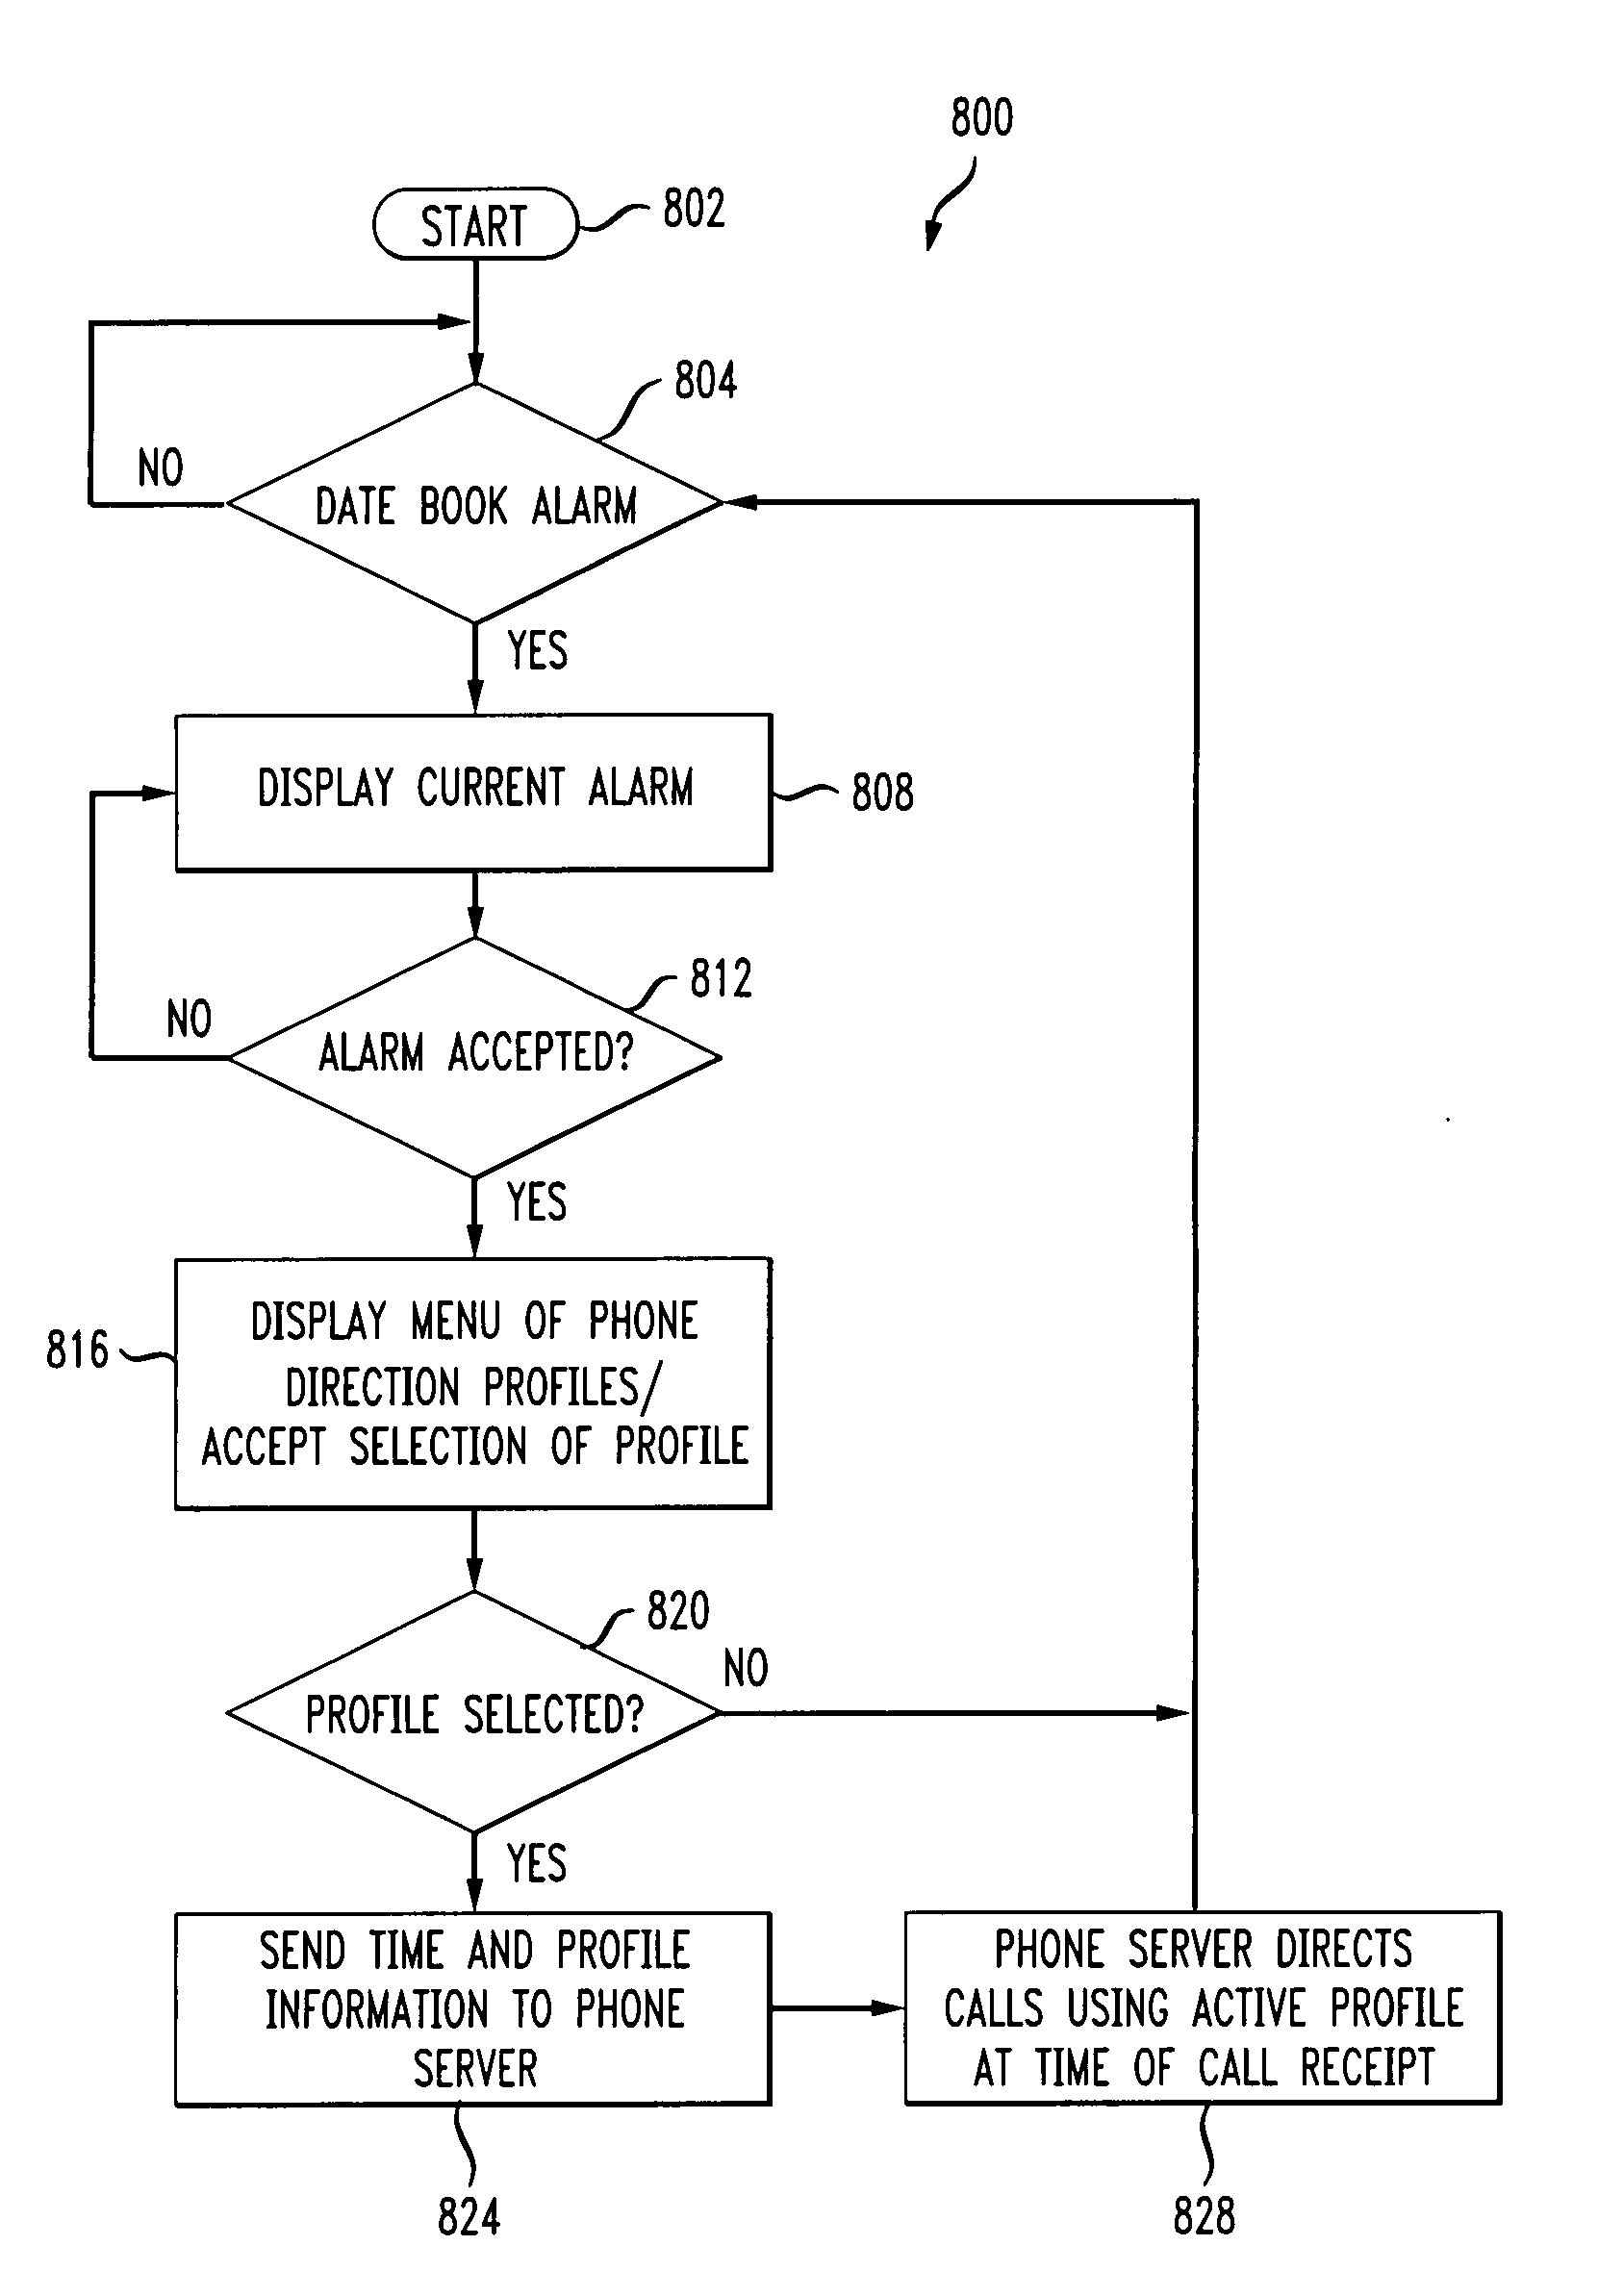 Unified messaging/call routing configuration using palmtop computer